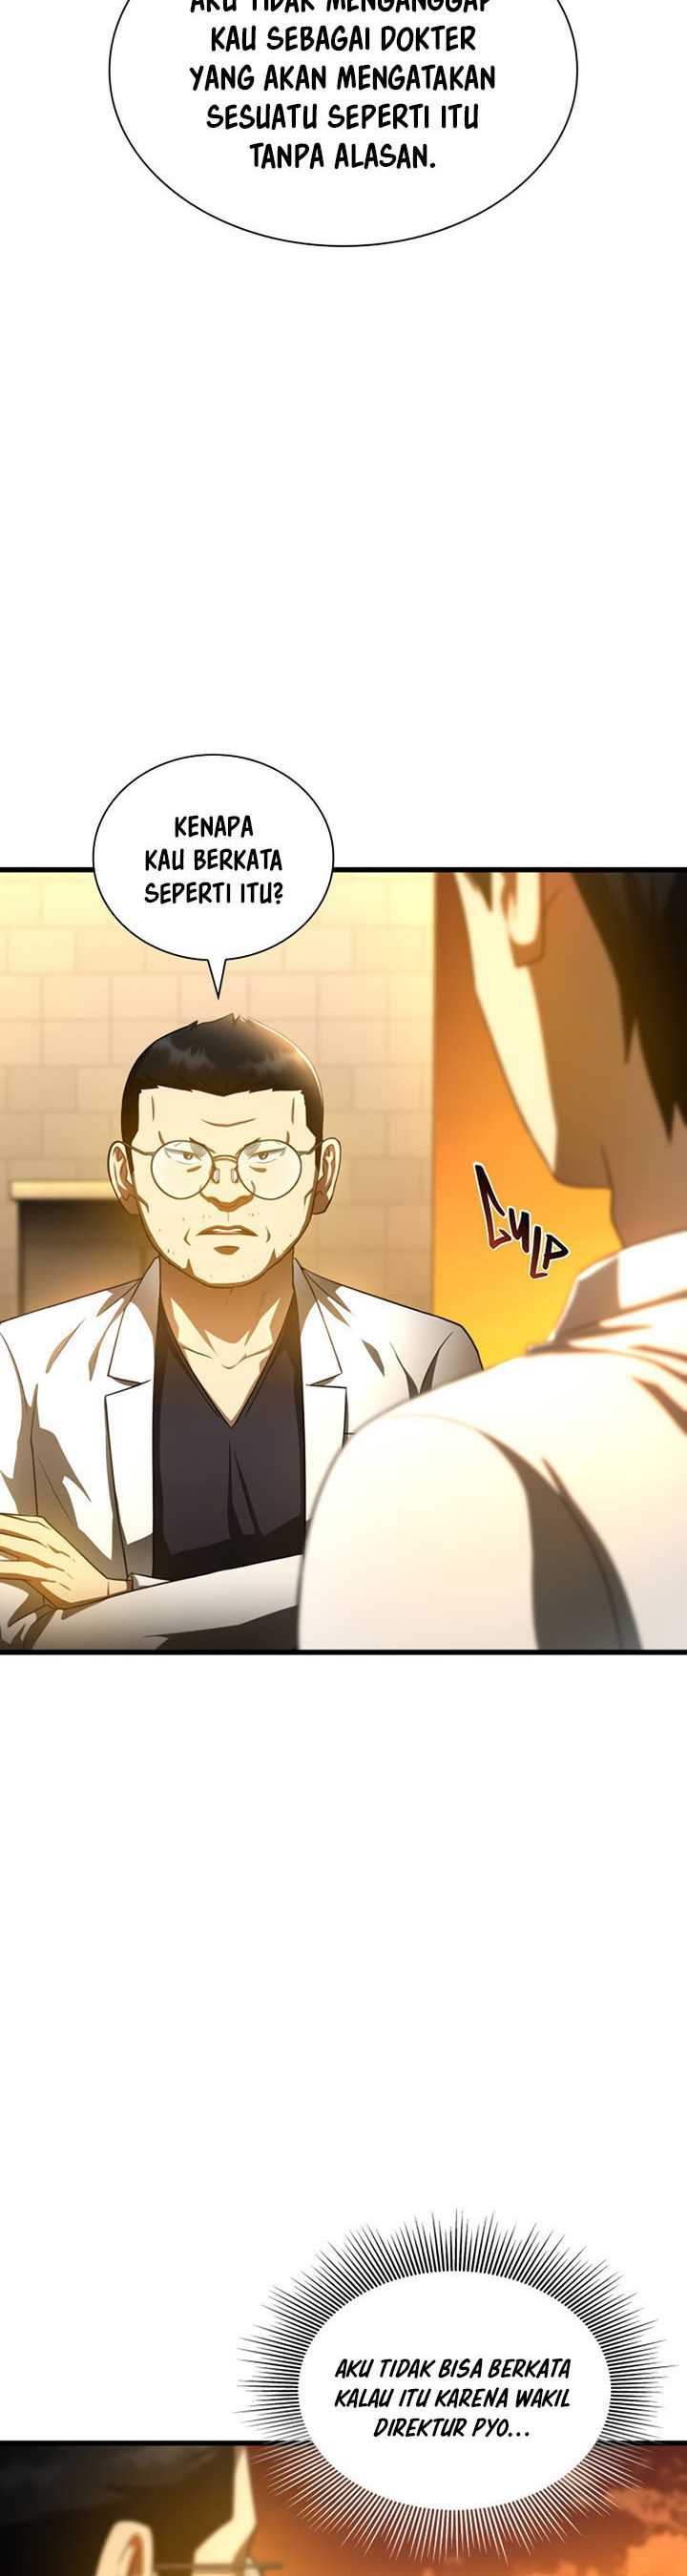 Perfect Surgeon Chapter 85